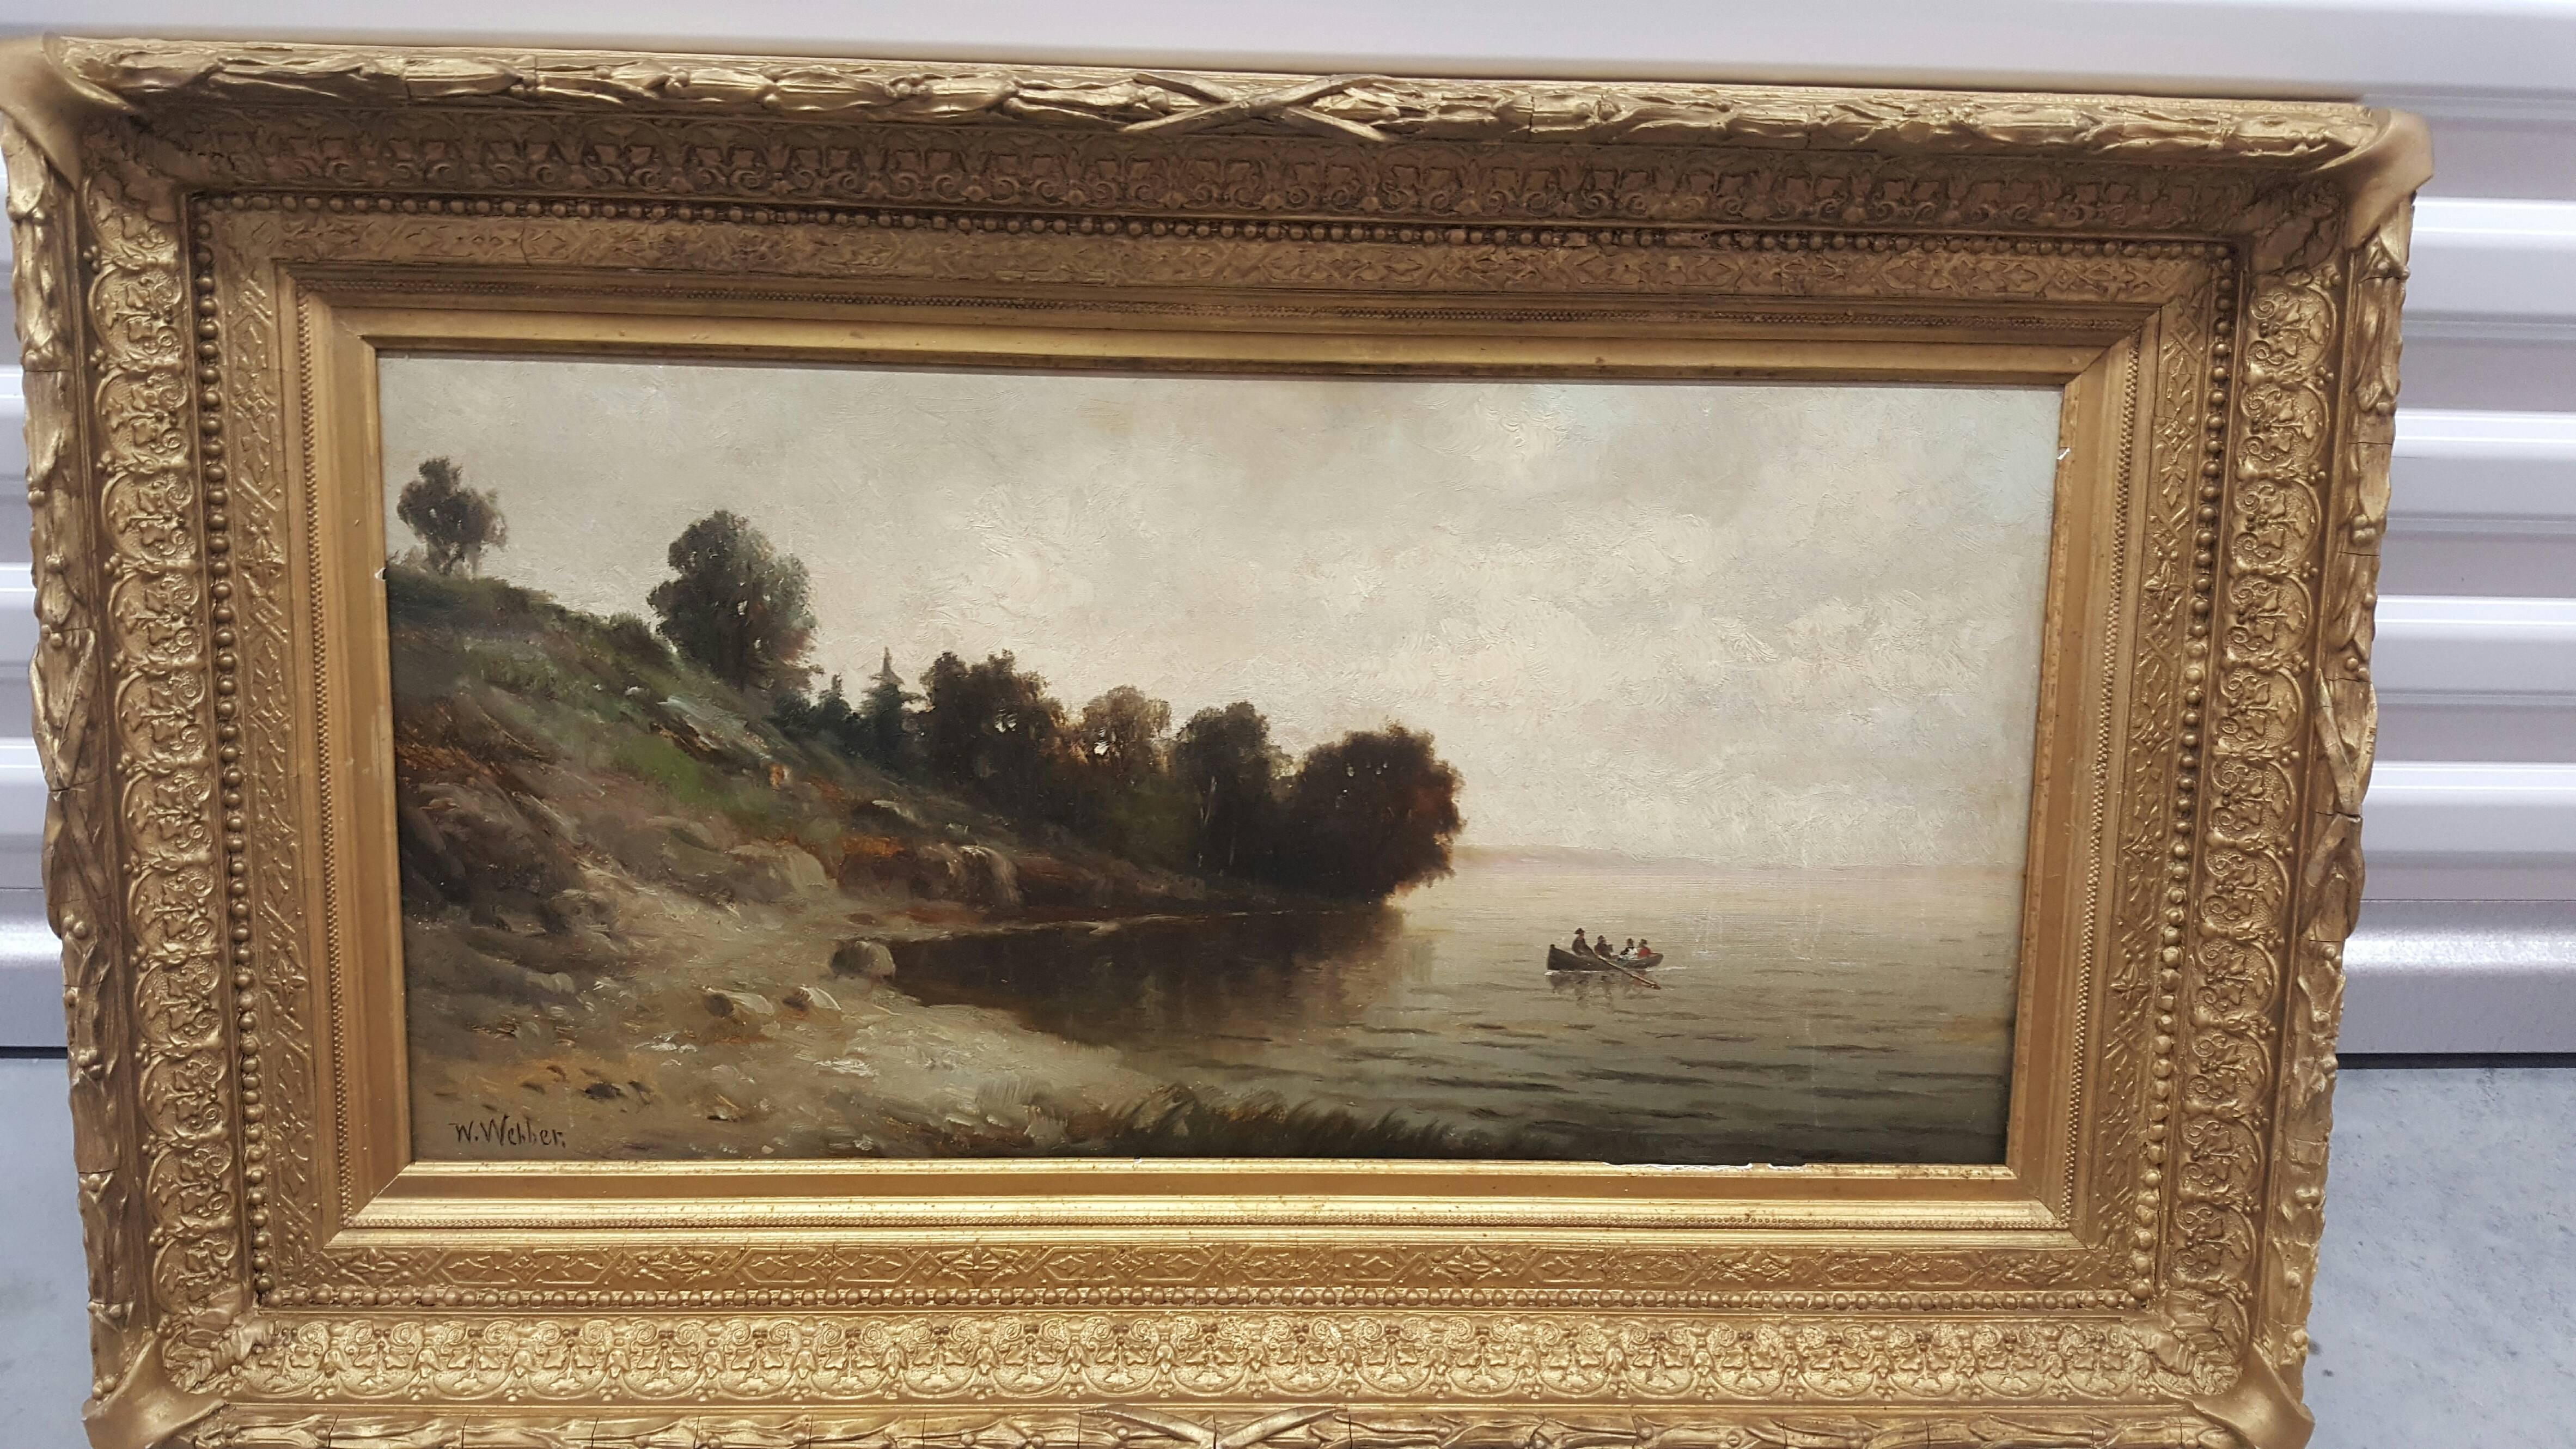 Lake Shore with Canoe - Painting by Wesley Webber